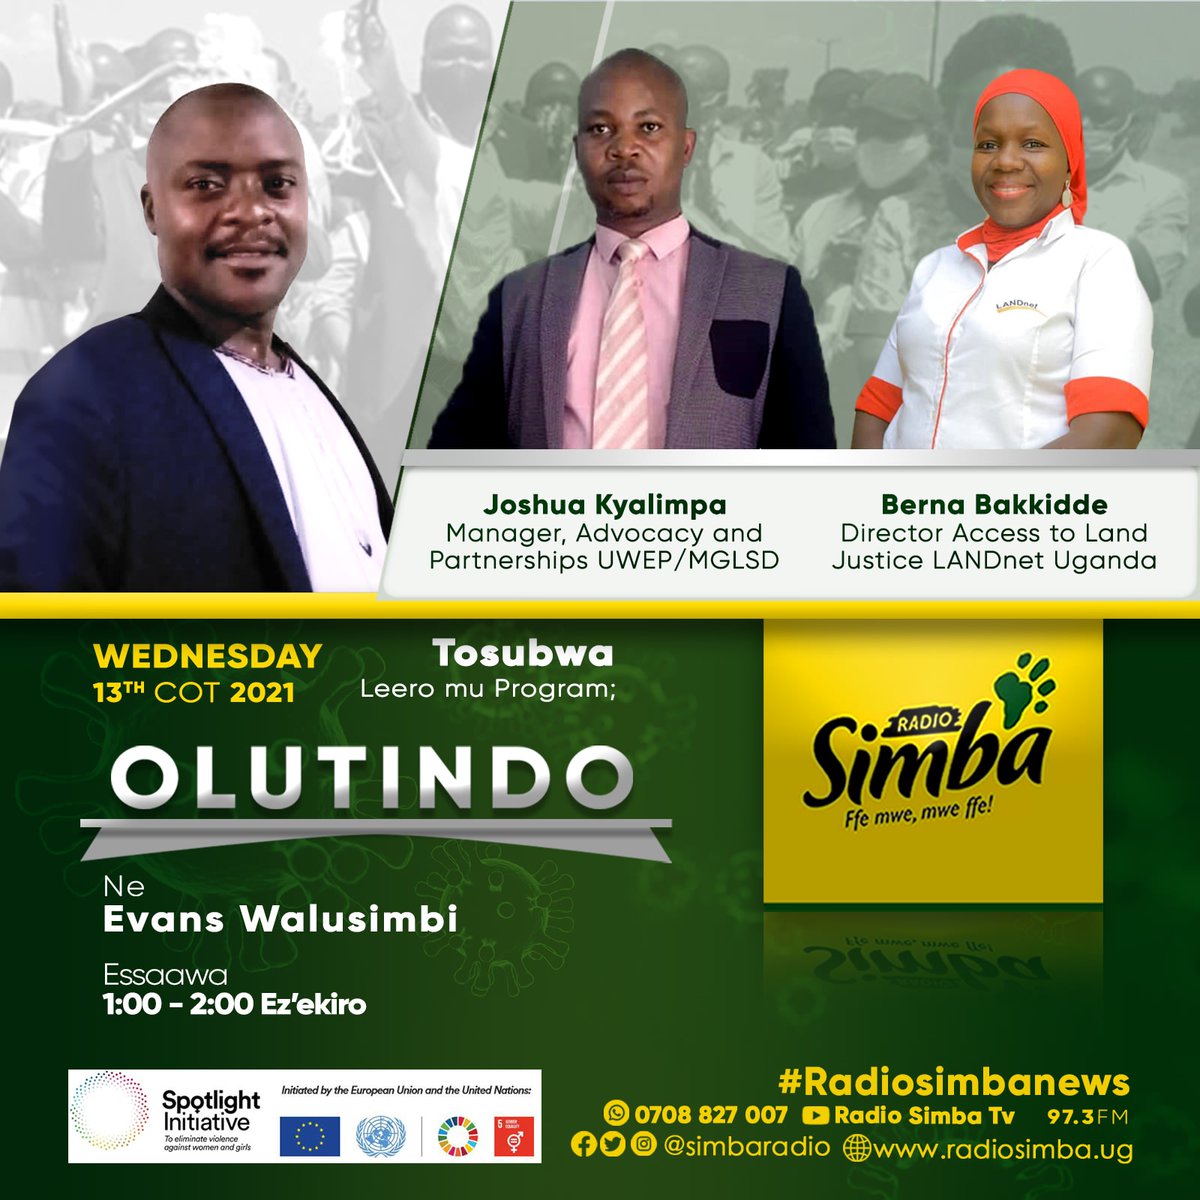 Follow this conversation this evening on Radio Simba fro 7:00pm-8:00pm as we build on the discussion to commemorate the day of the rural woman.
#IRWD2021
@landnetug @Mglsd_UG 
@bakkiddeberna